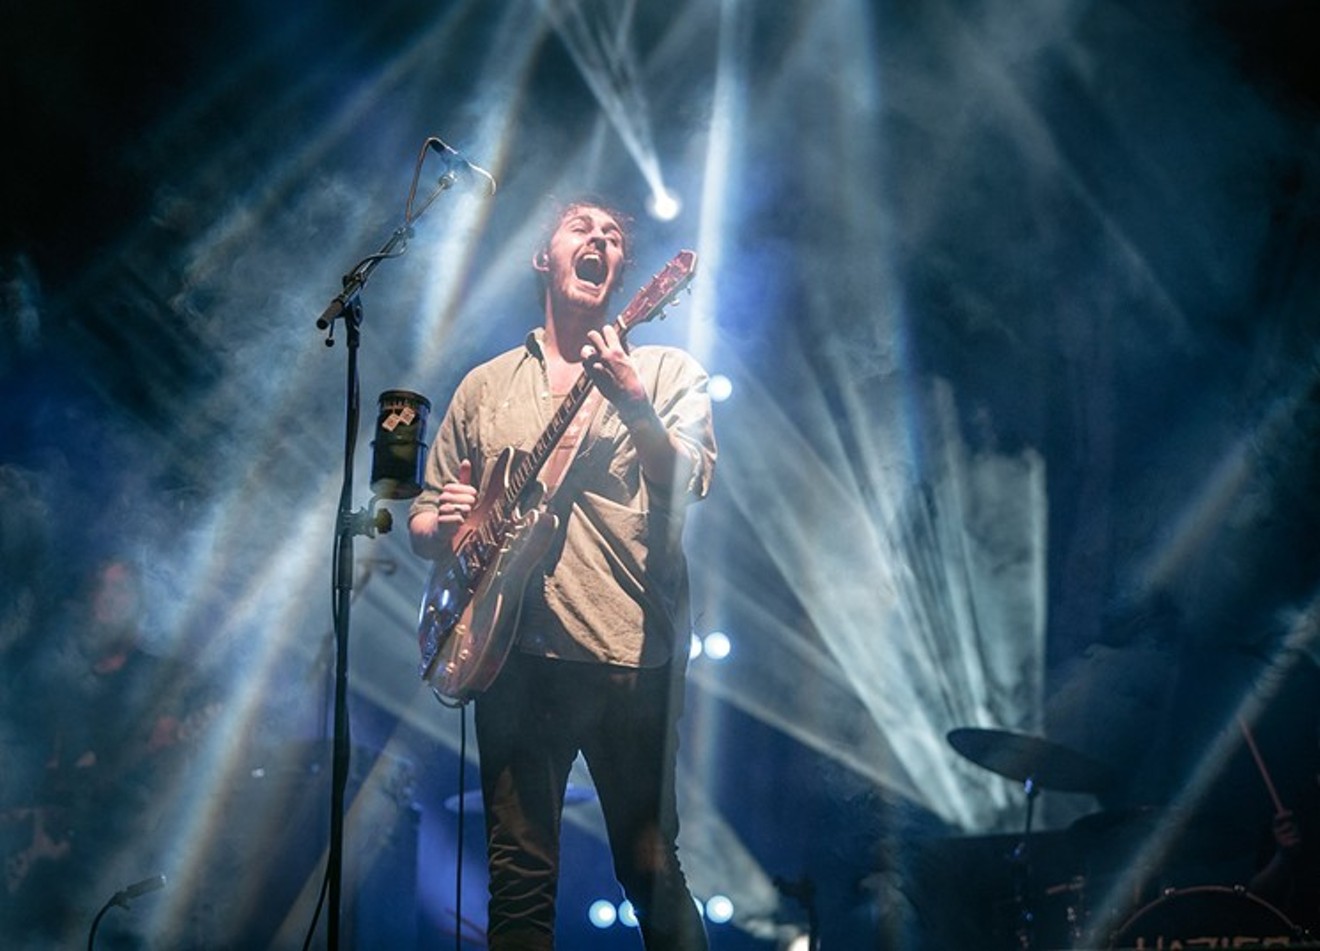 Hozier performing at Tempe Beach Park in 2015